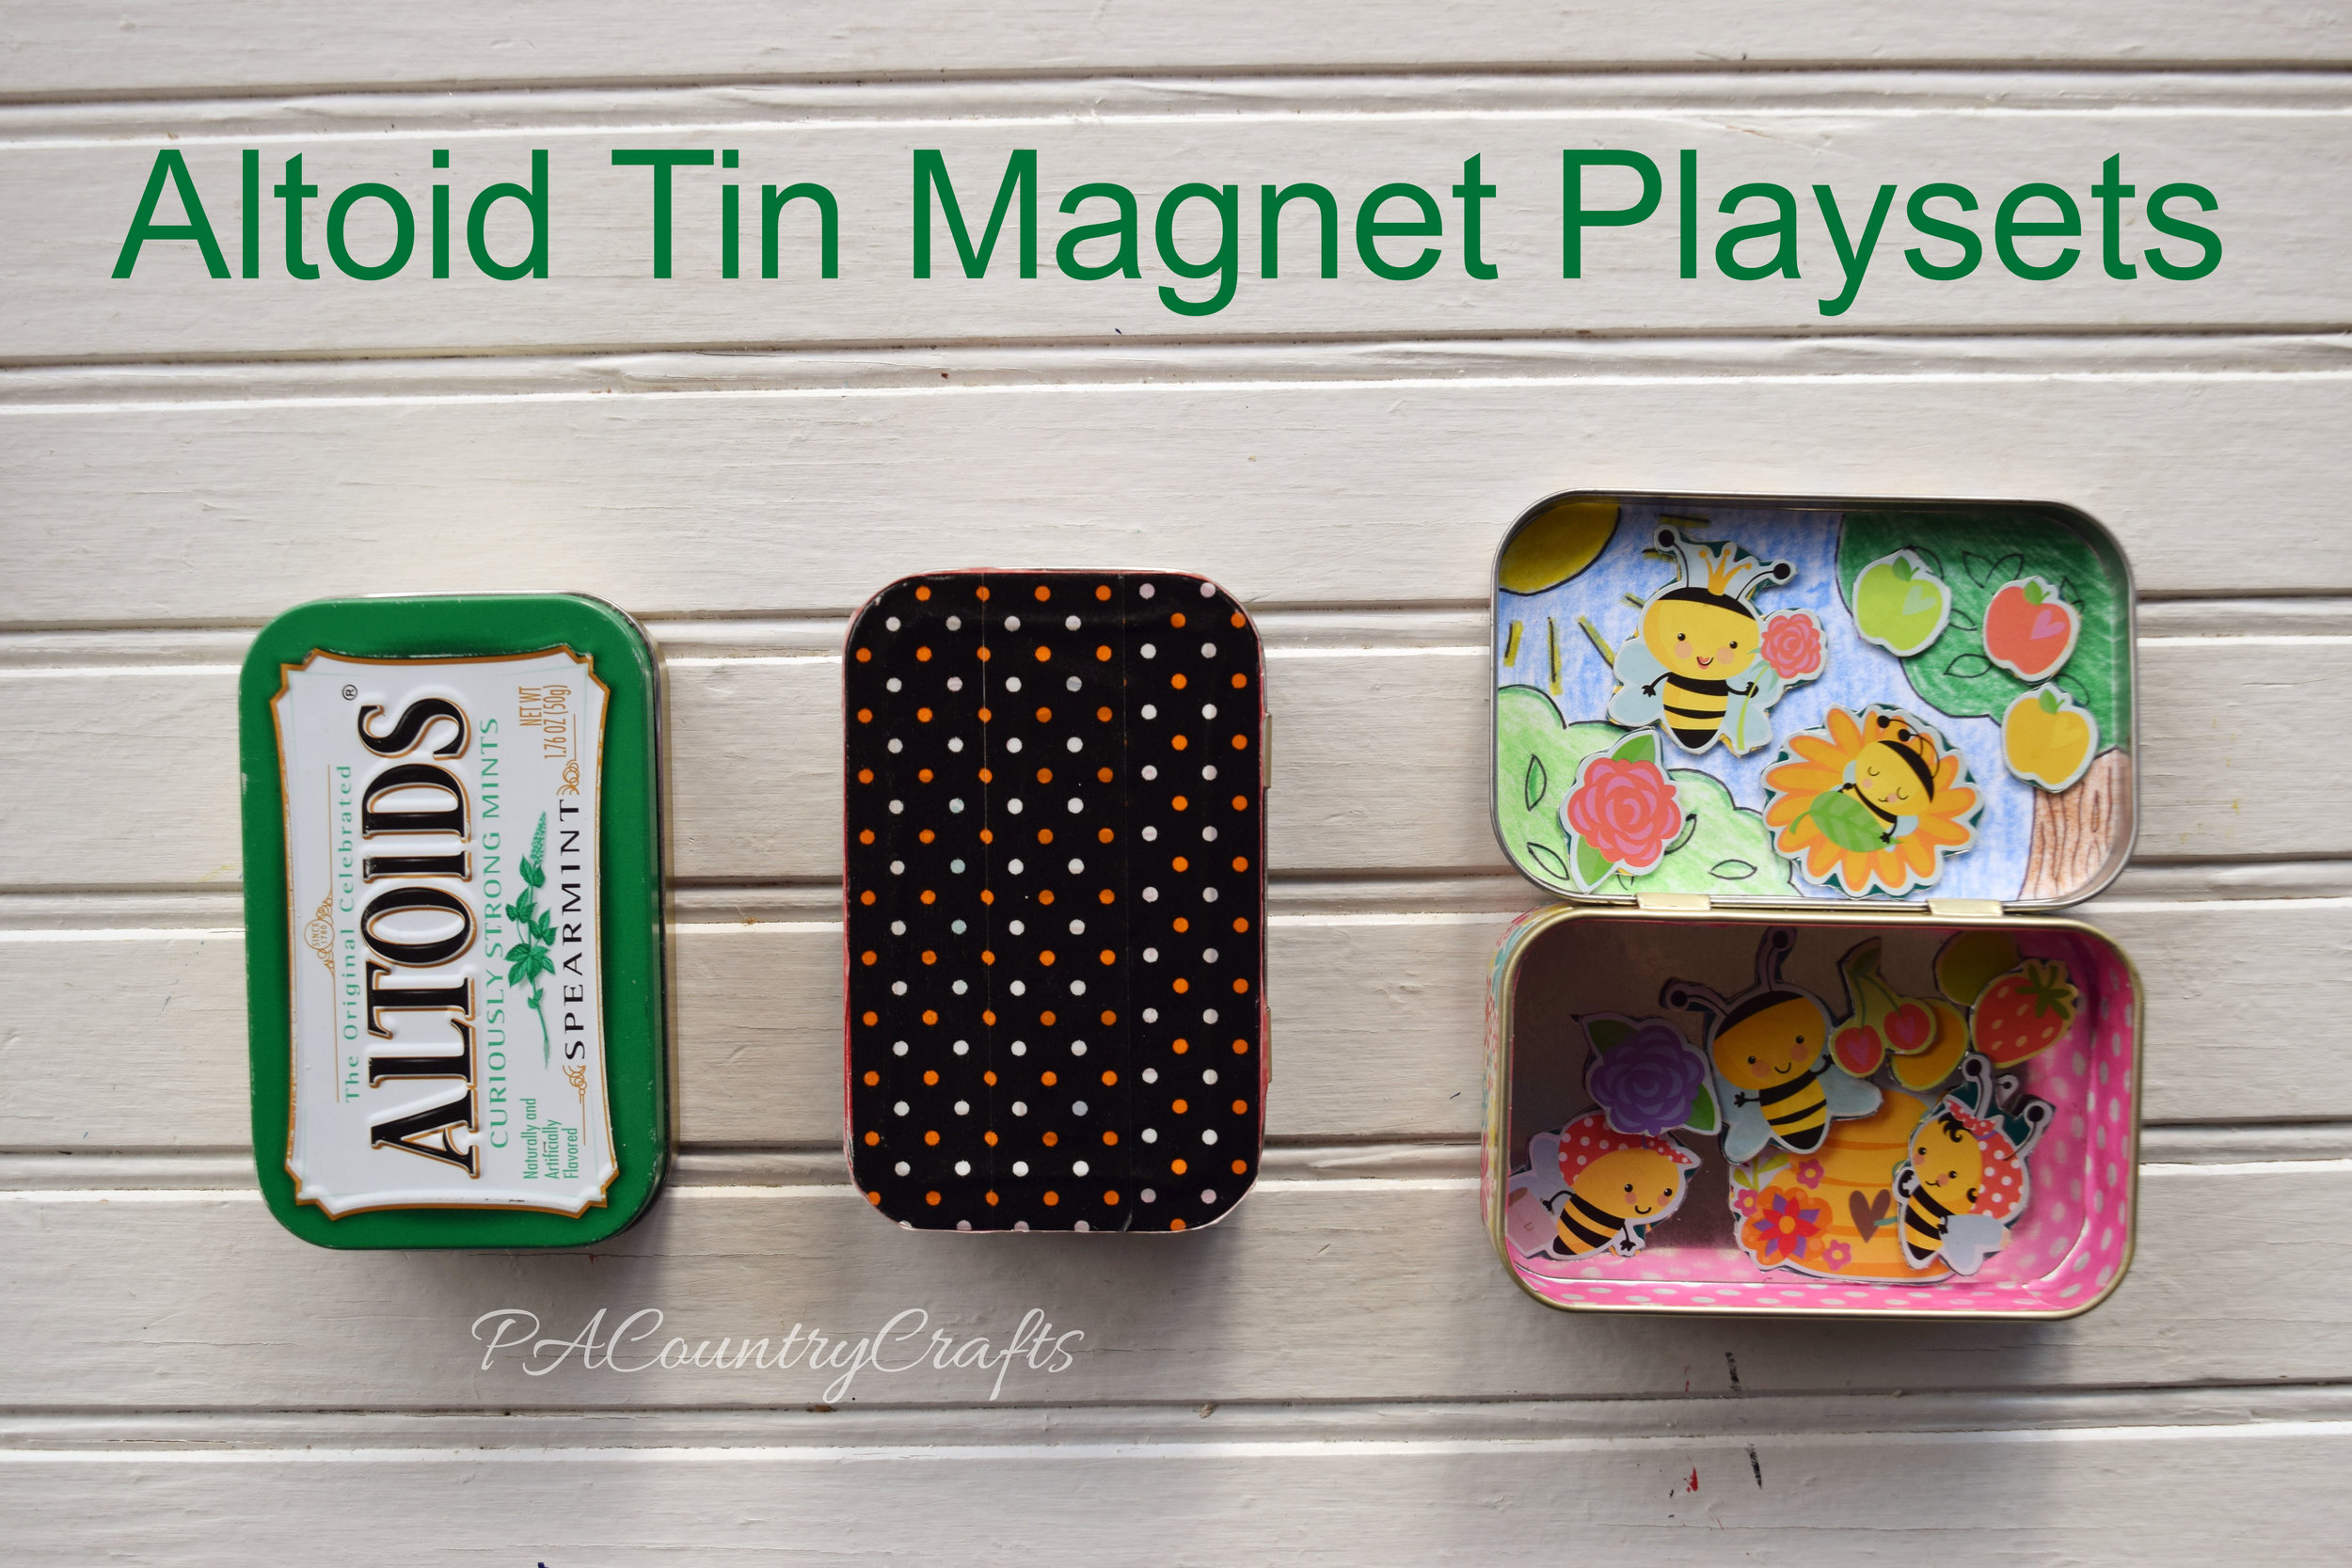 Altoid Tin Magnet Playsets- perfect to tuck into the purse or diaper bag!